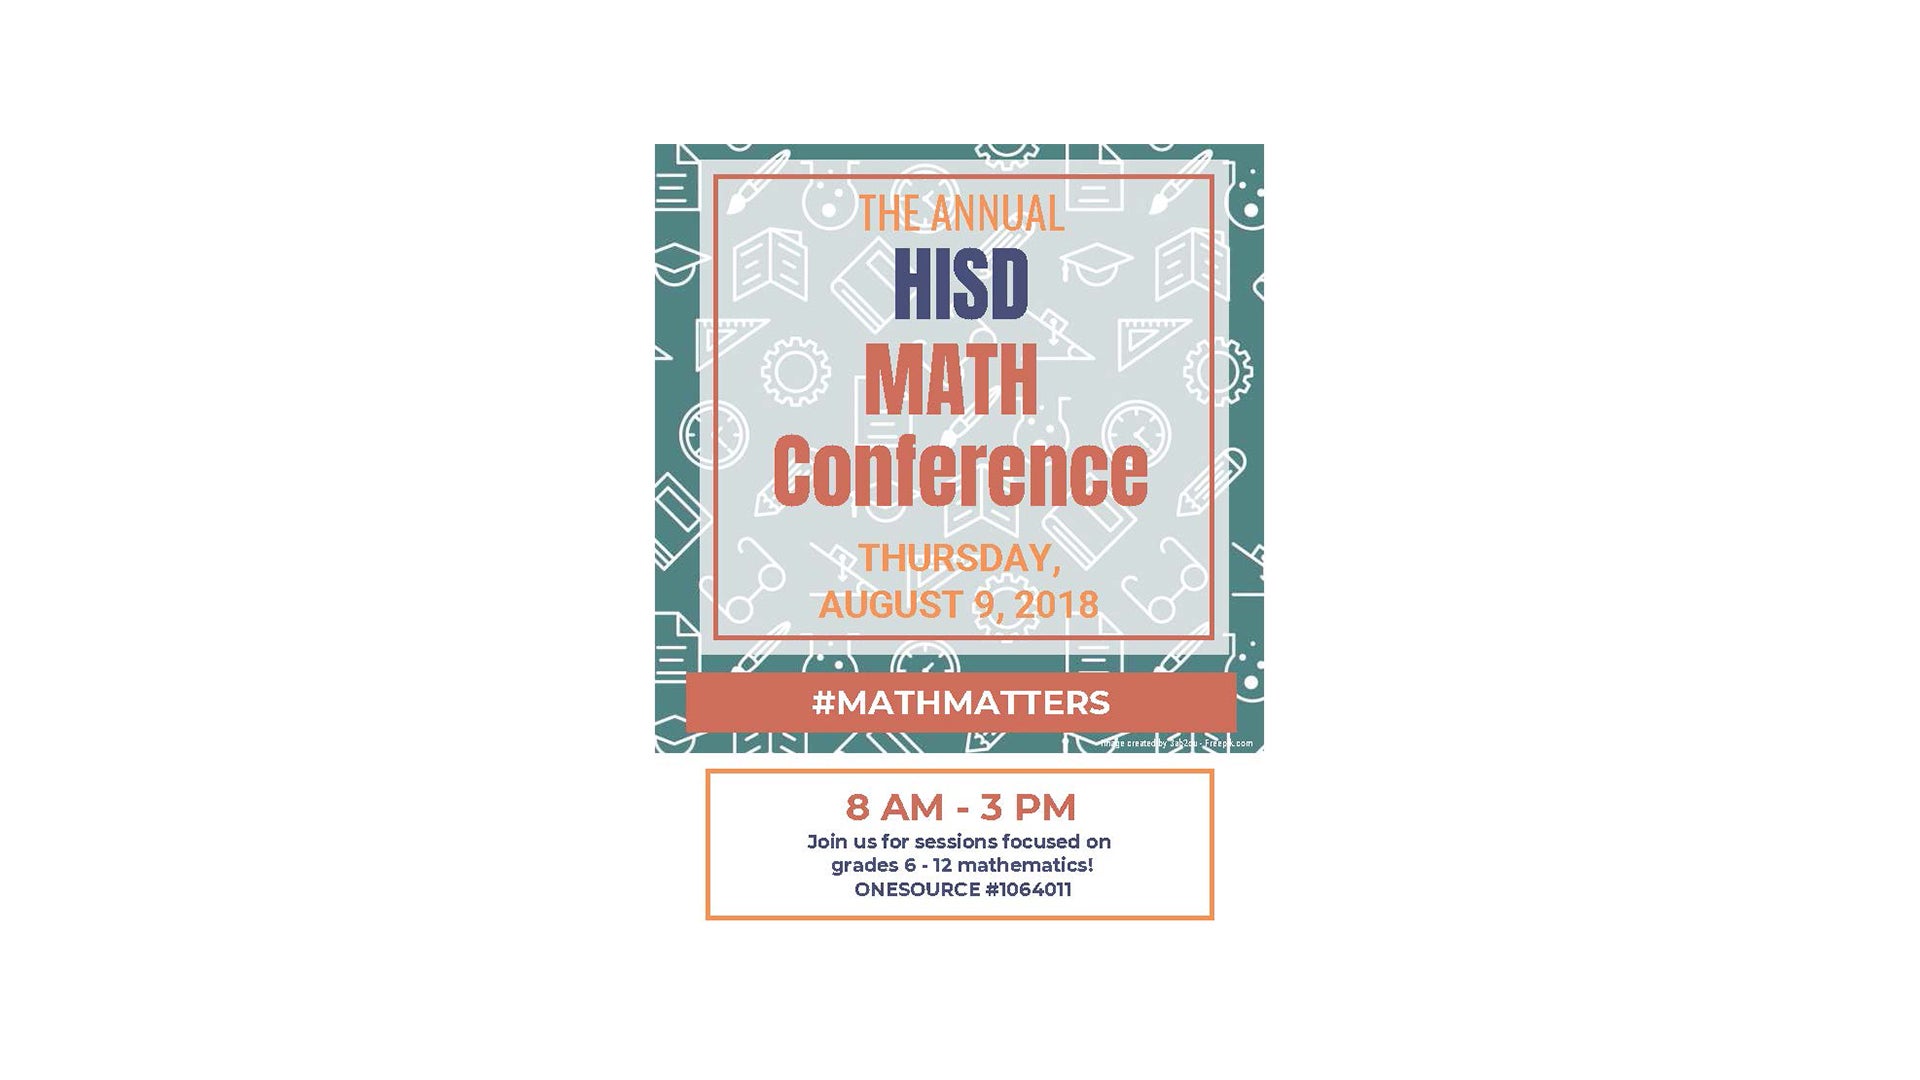 HISD Math Conference features Noyce Fellows